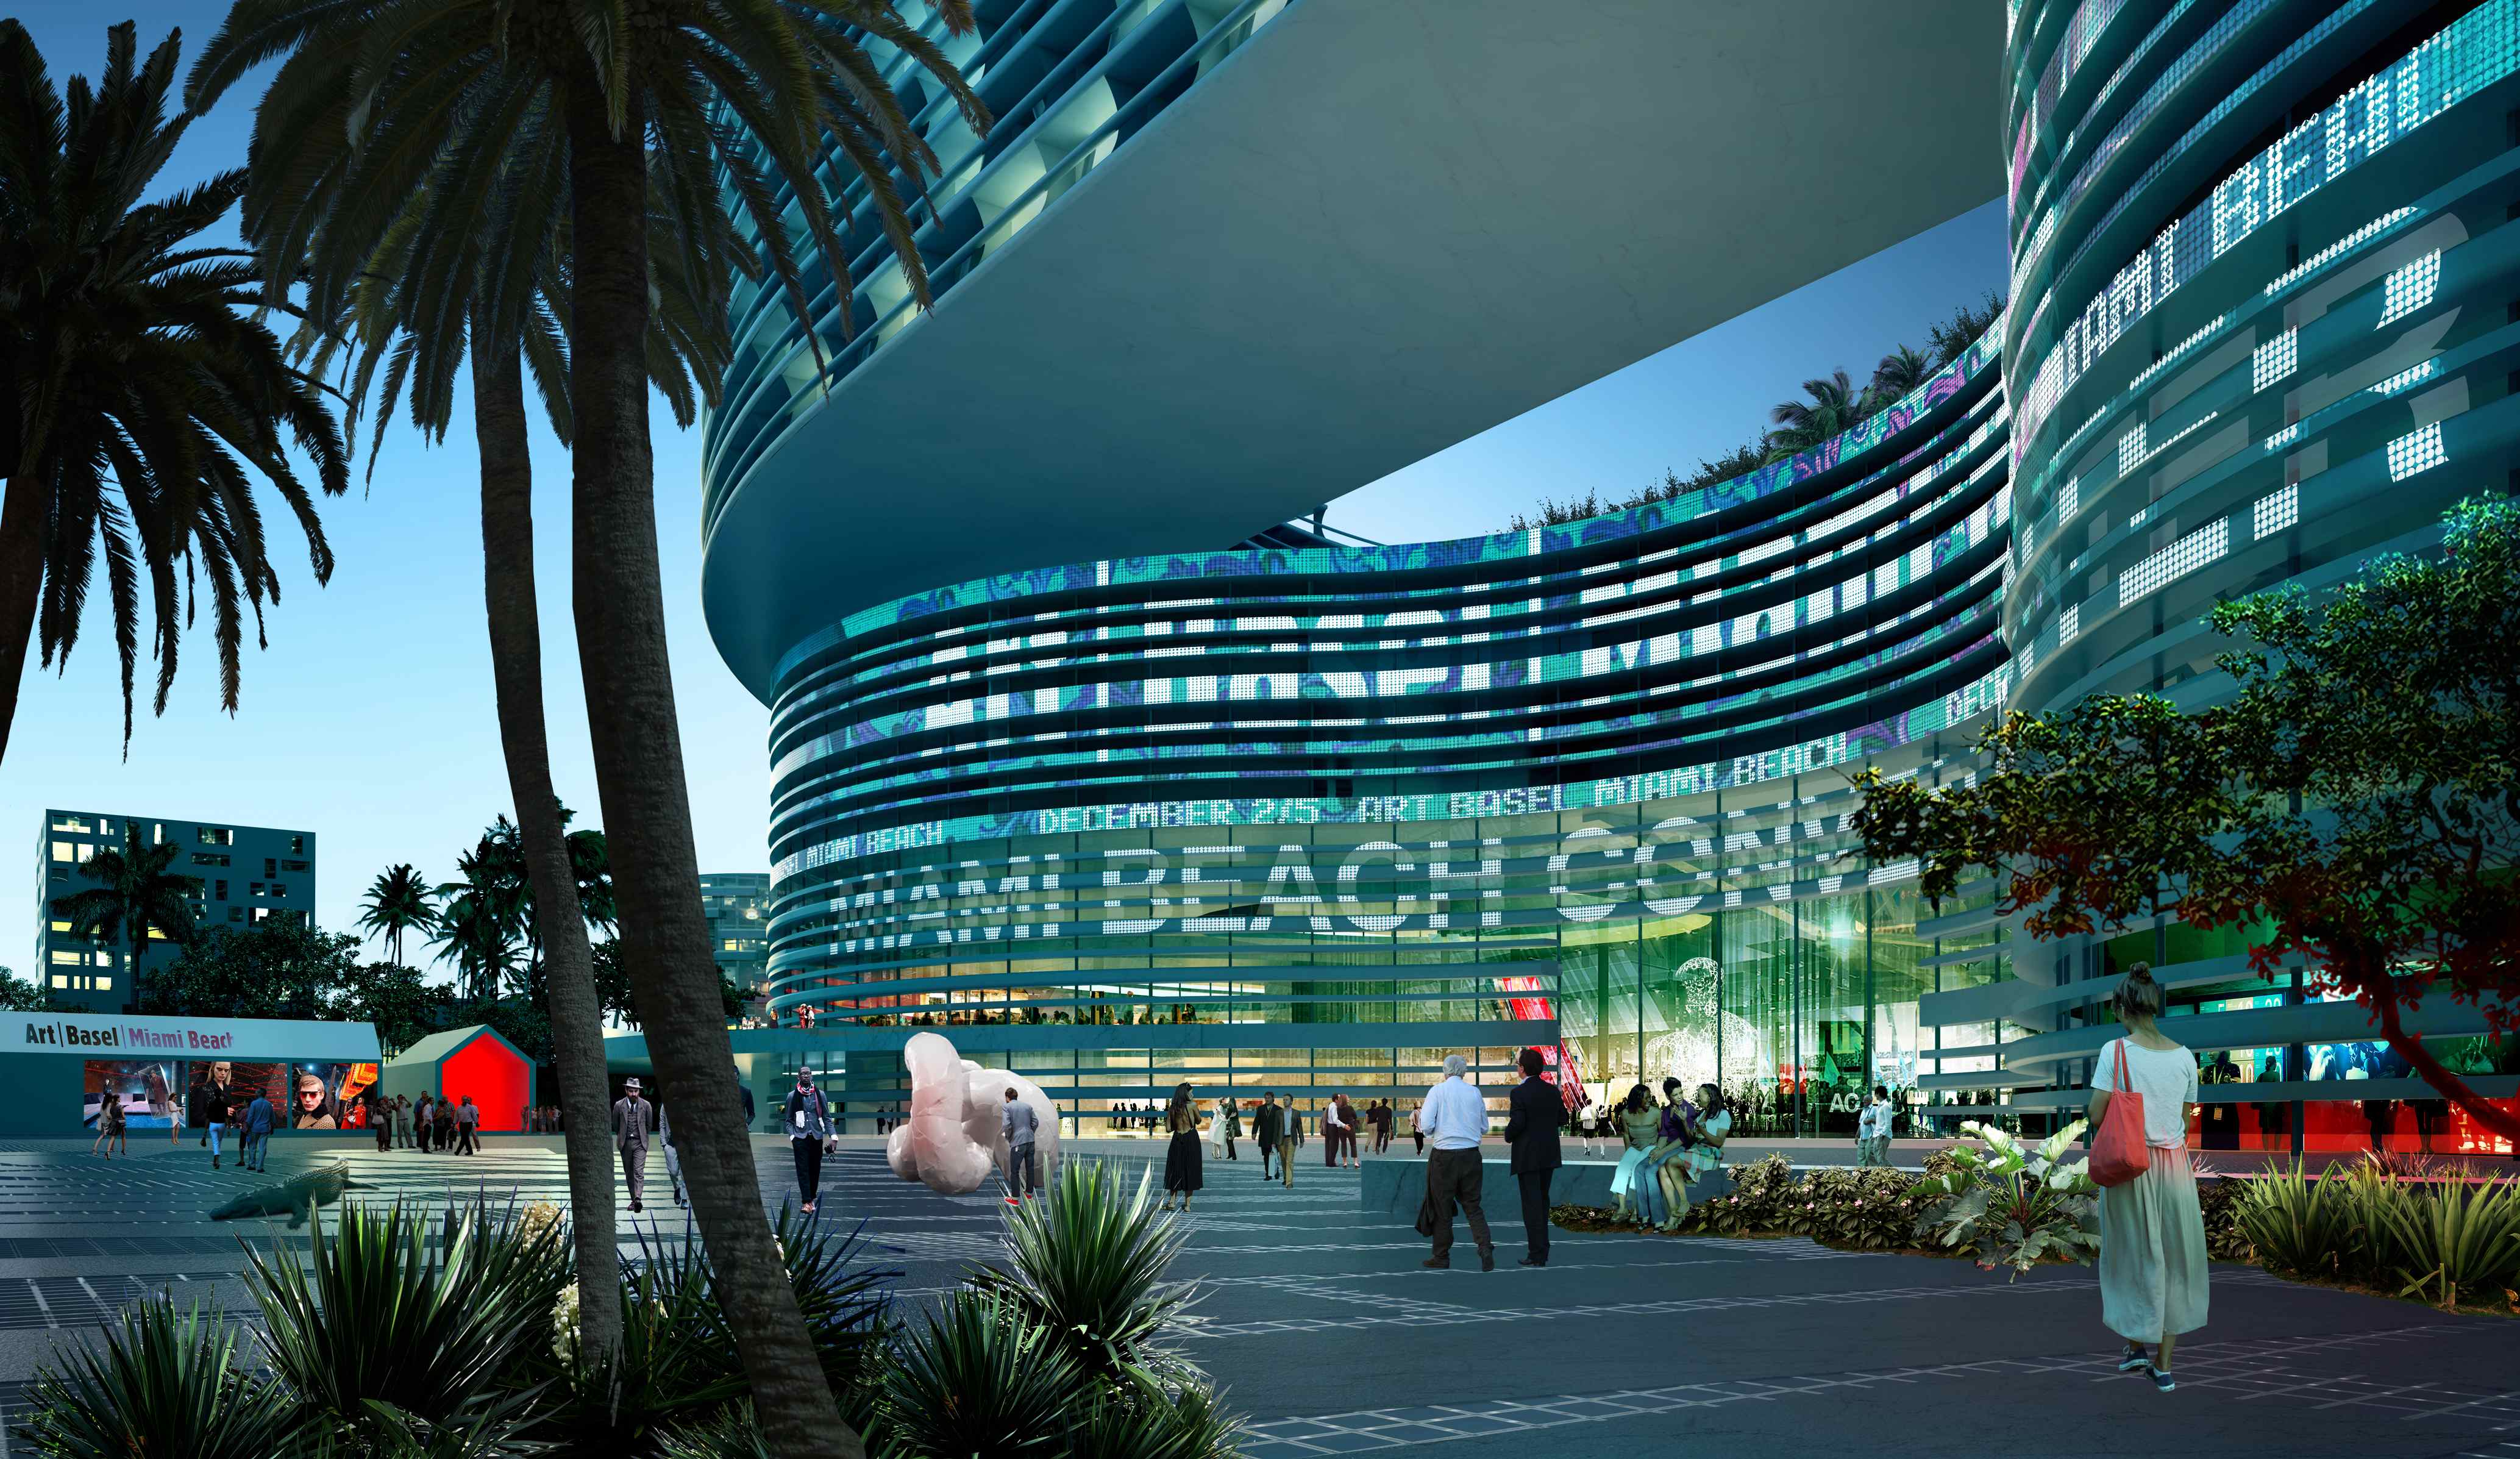 OMA New York selected as masterplan designer and lead architect for Miami Beach Convention Center redevelopment